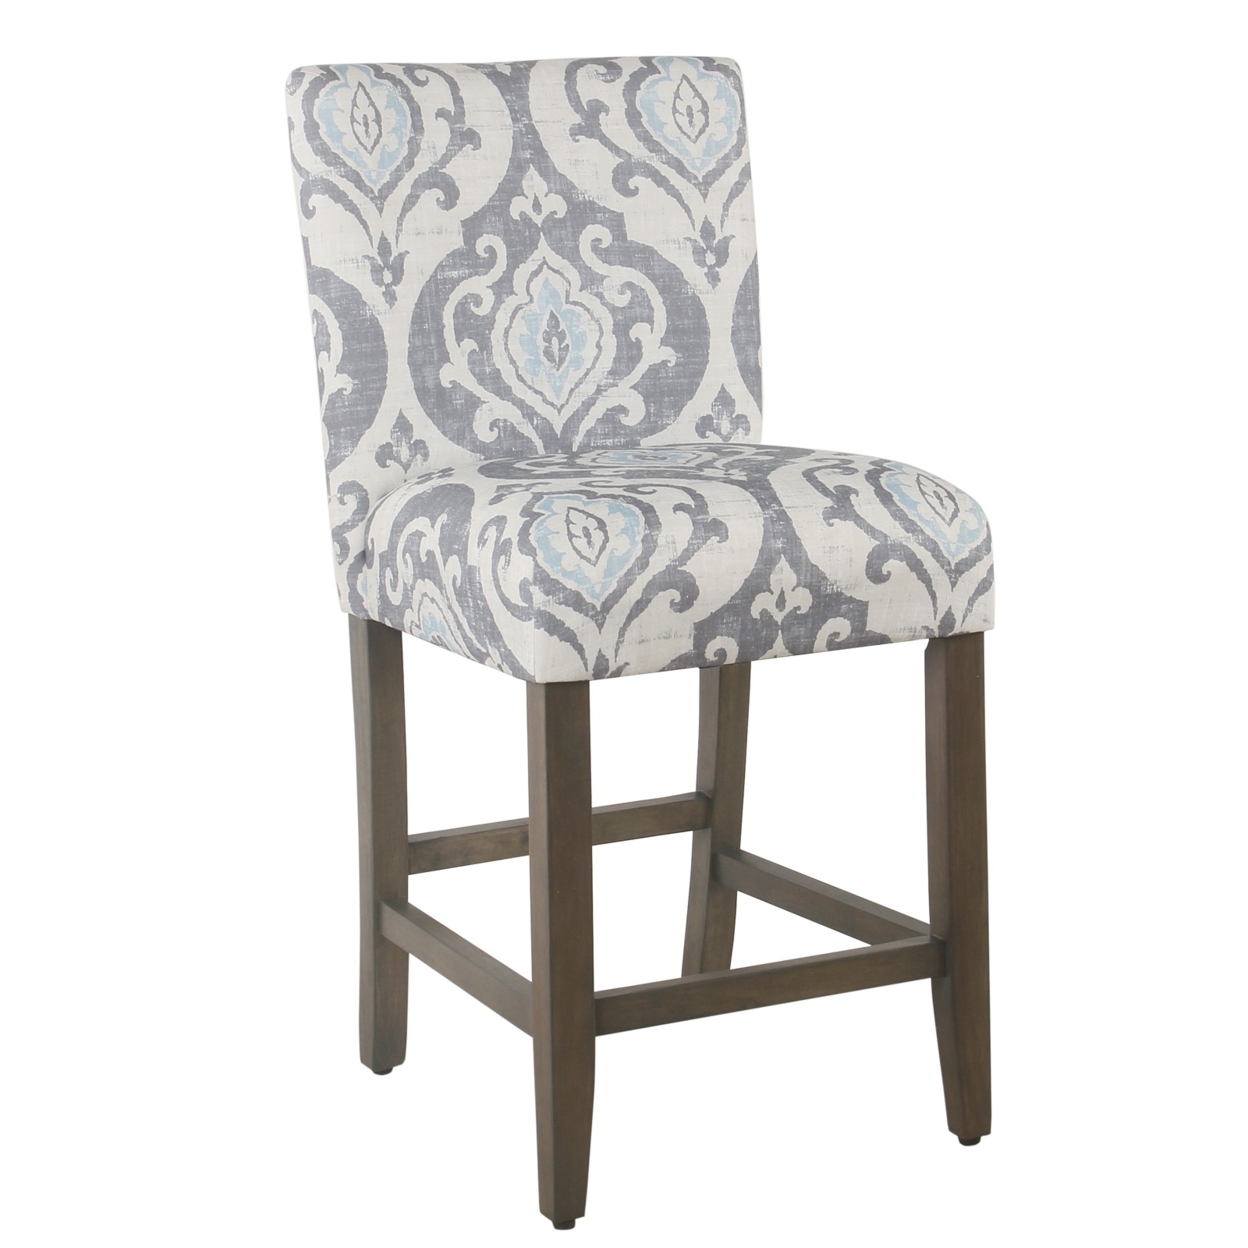 Wooden Counter Height Stool With Damask Pattern Fabric Upholstery, Gray And Blue- Saltoro Sherpi